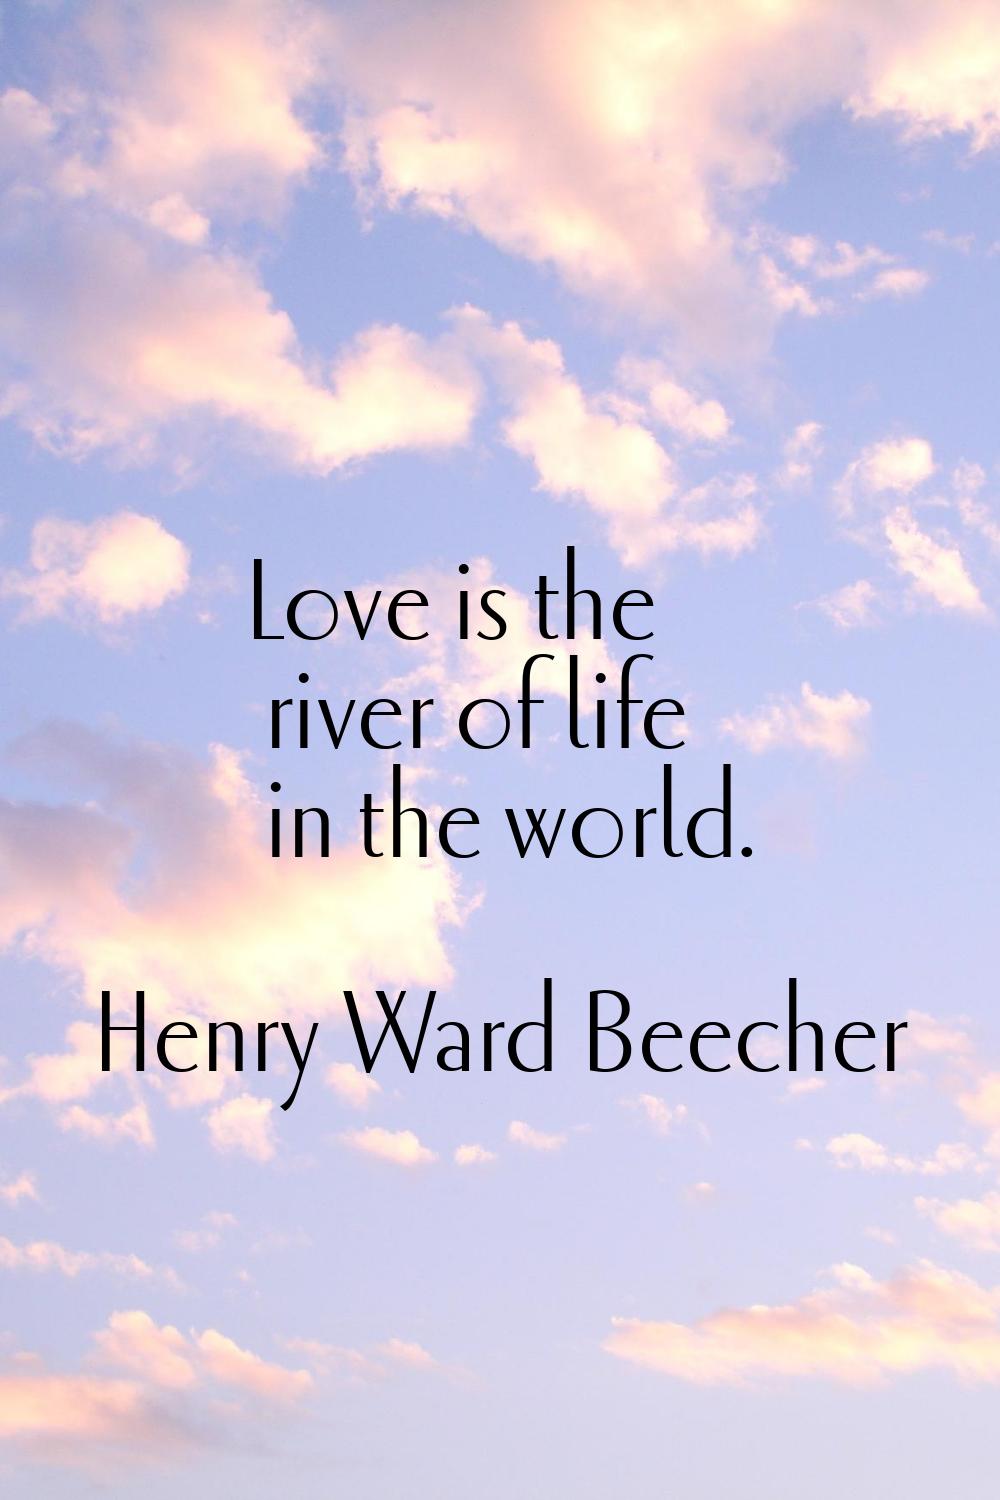 Love is the river of life in the world.